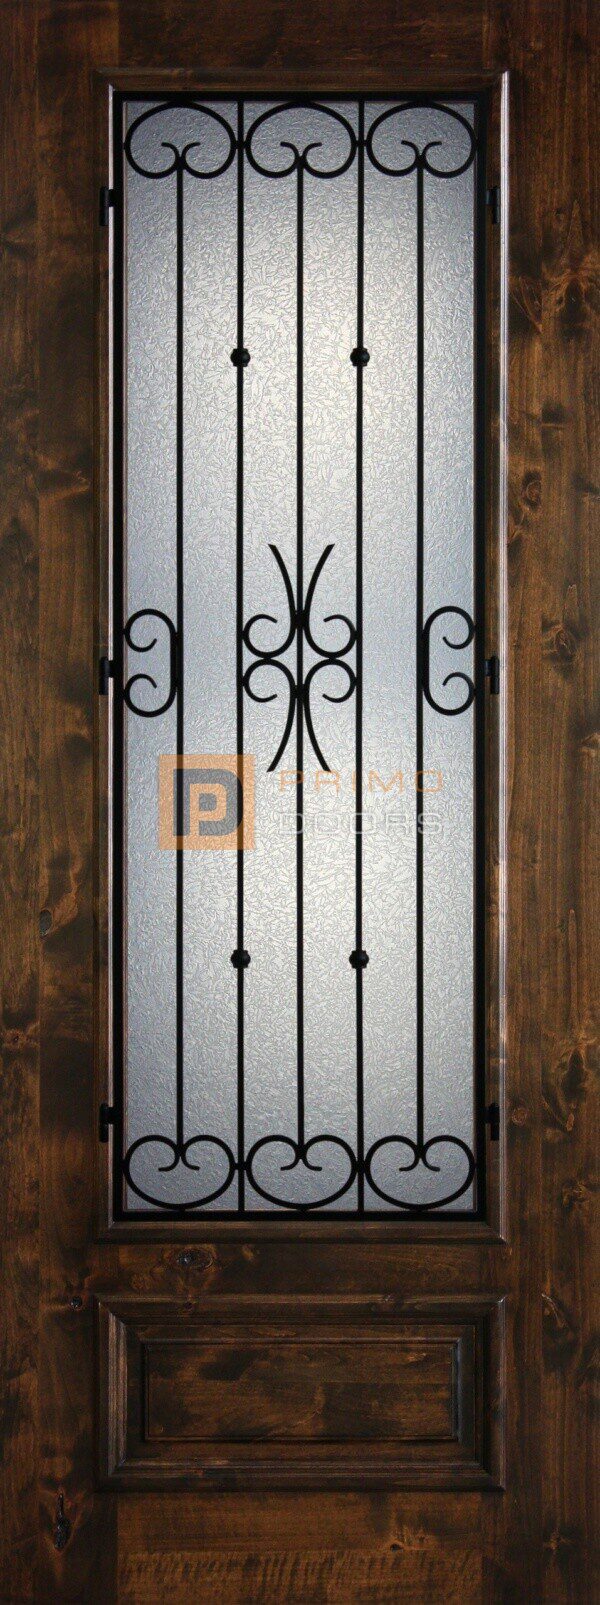 8' 3/4 Lite Knotty Alder Decorative Glass with Iron Grill Single Iron Front Door - PD KA 3080-34 BALF